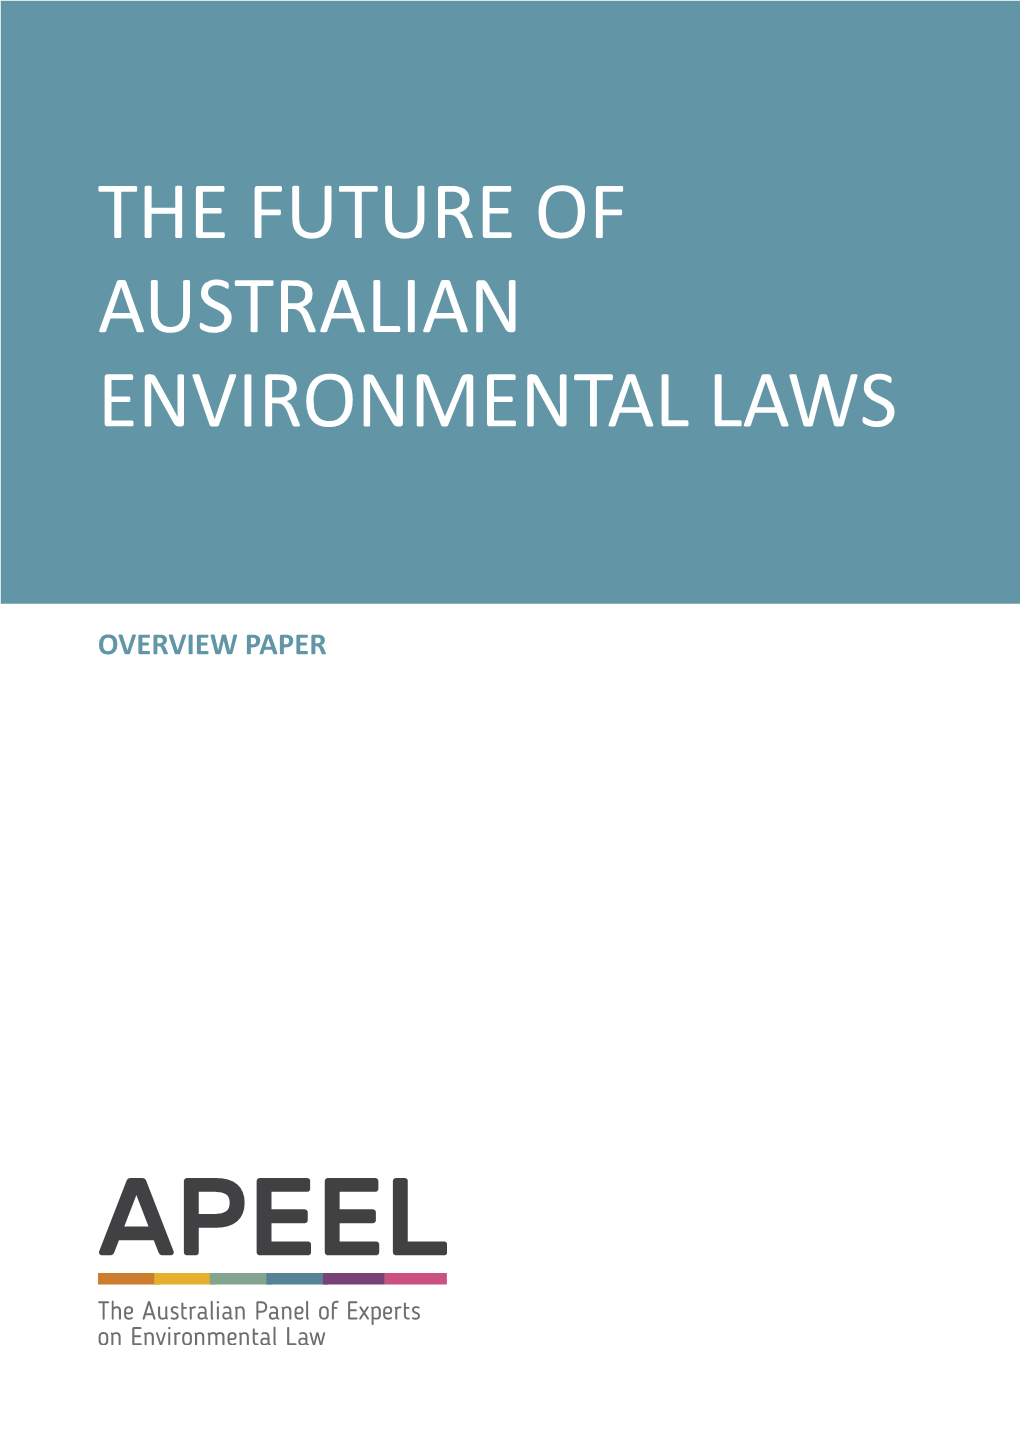 Overview of the Future of Australian Environmental